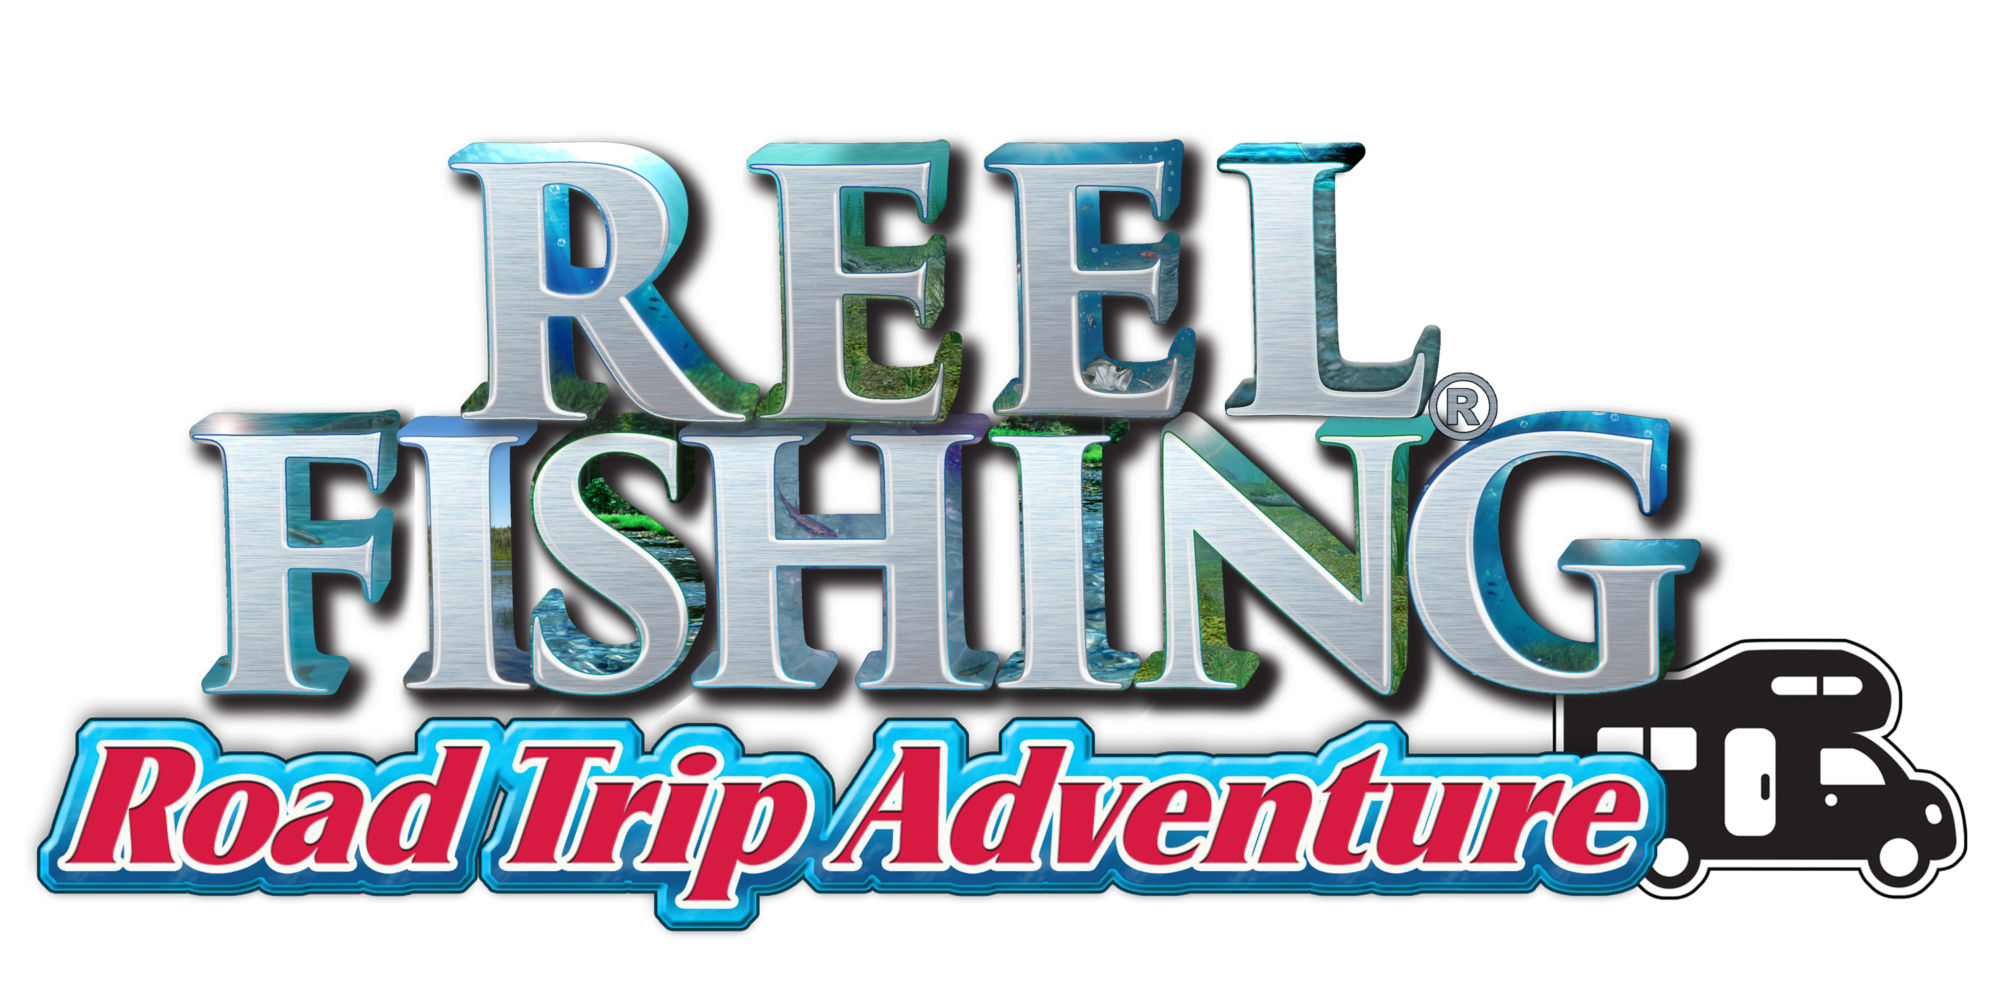 Natsume Let Us Try Reel Fishing: Road Trip Adventure At E3